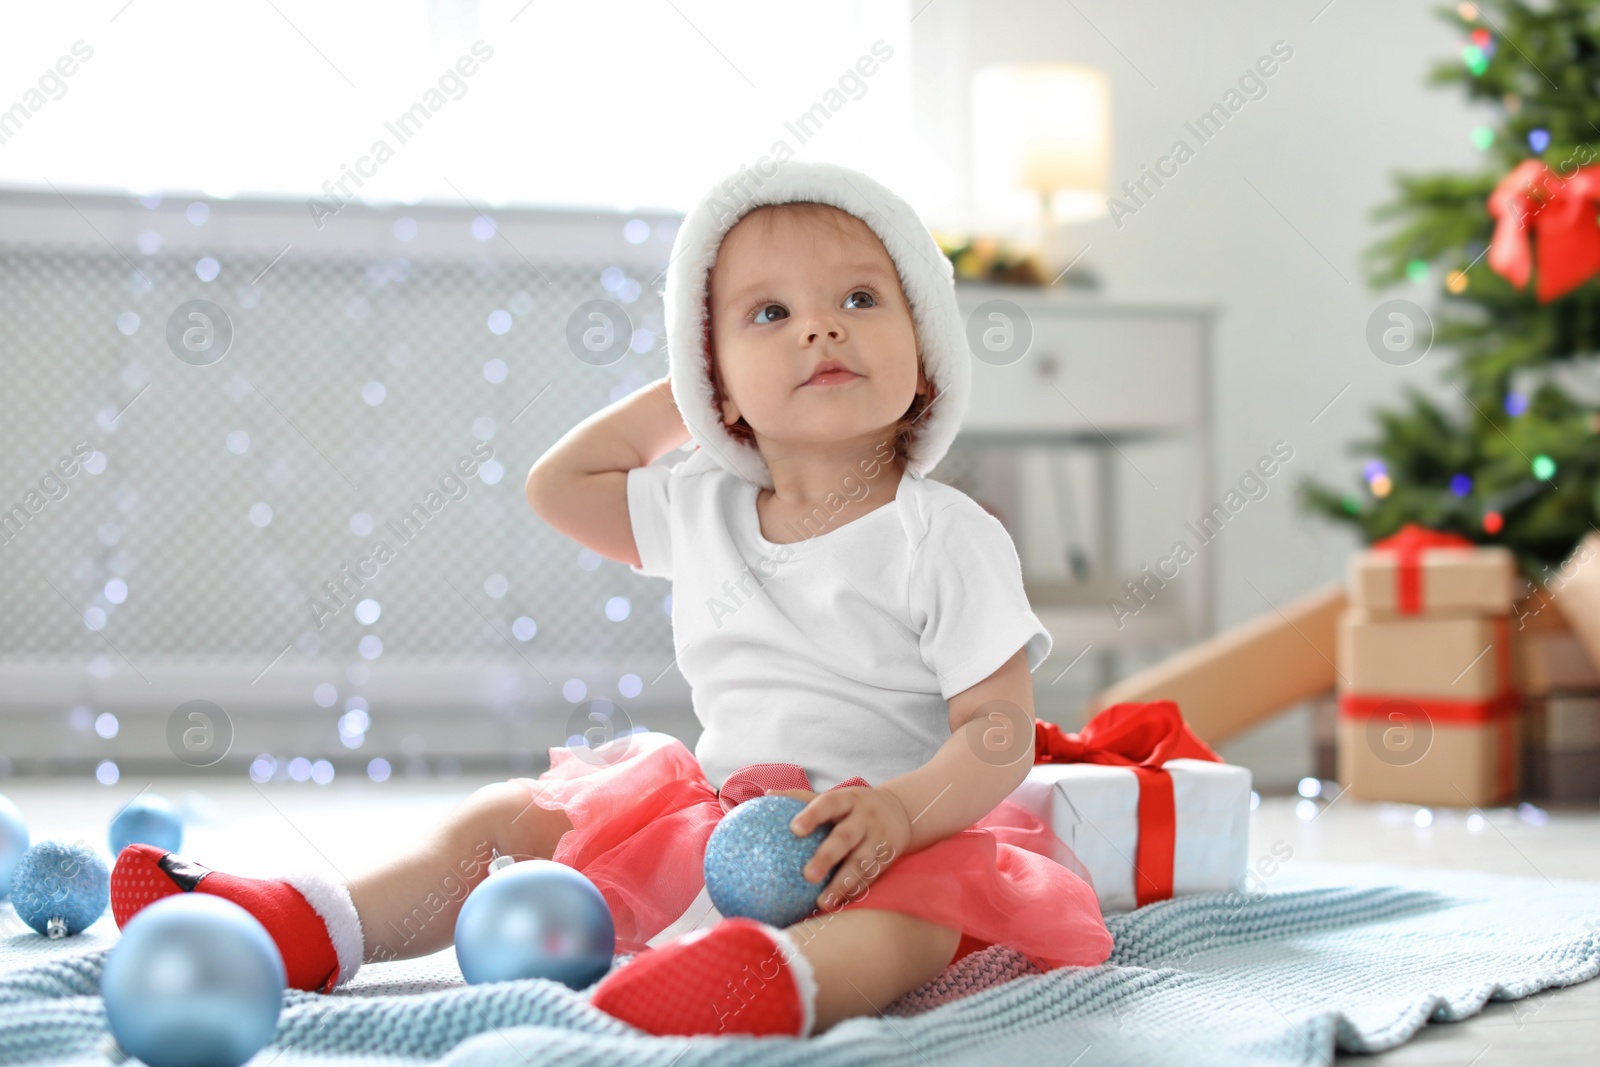 Photo of Cute baby in festive costume playing with Christmas decor on floor at home